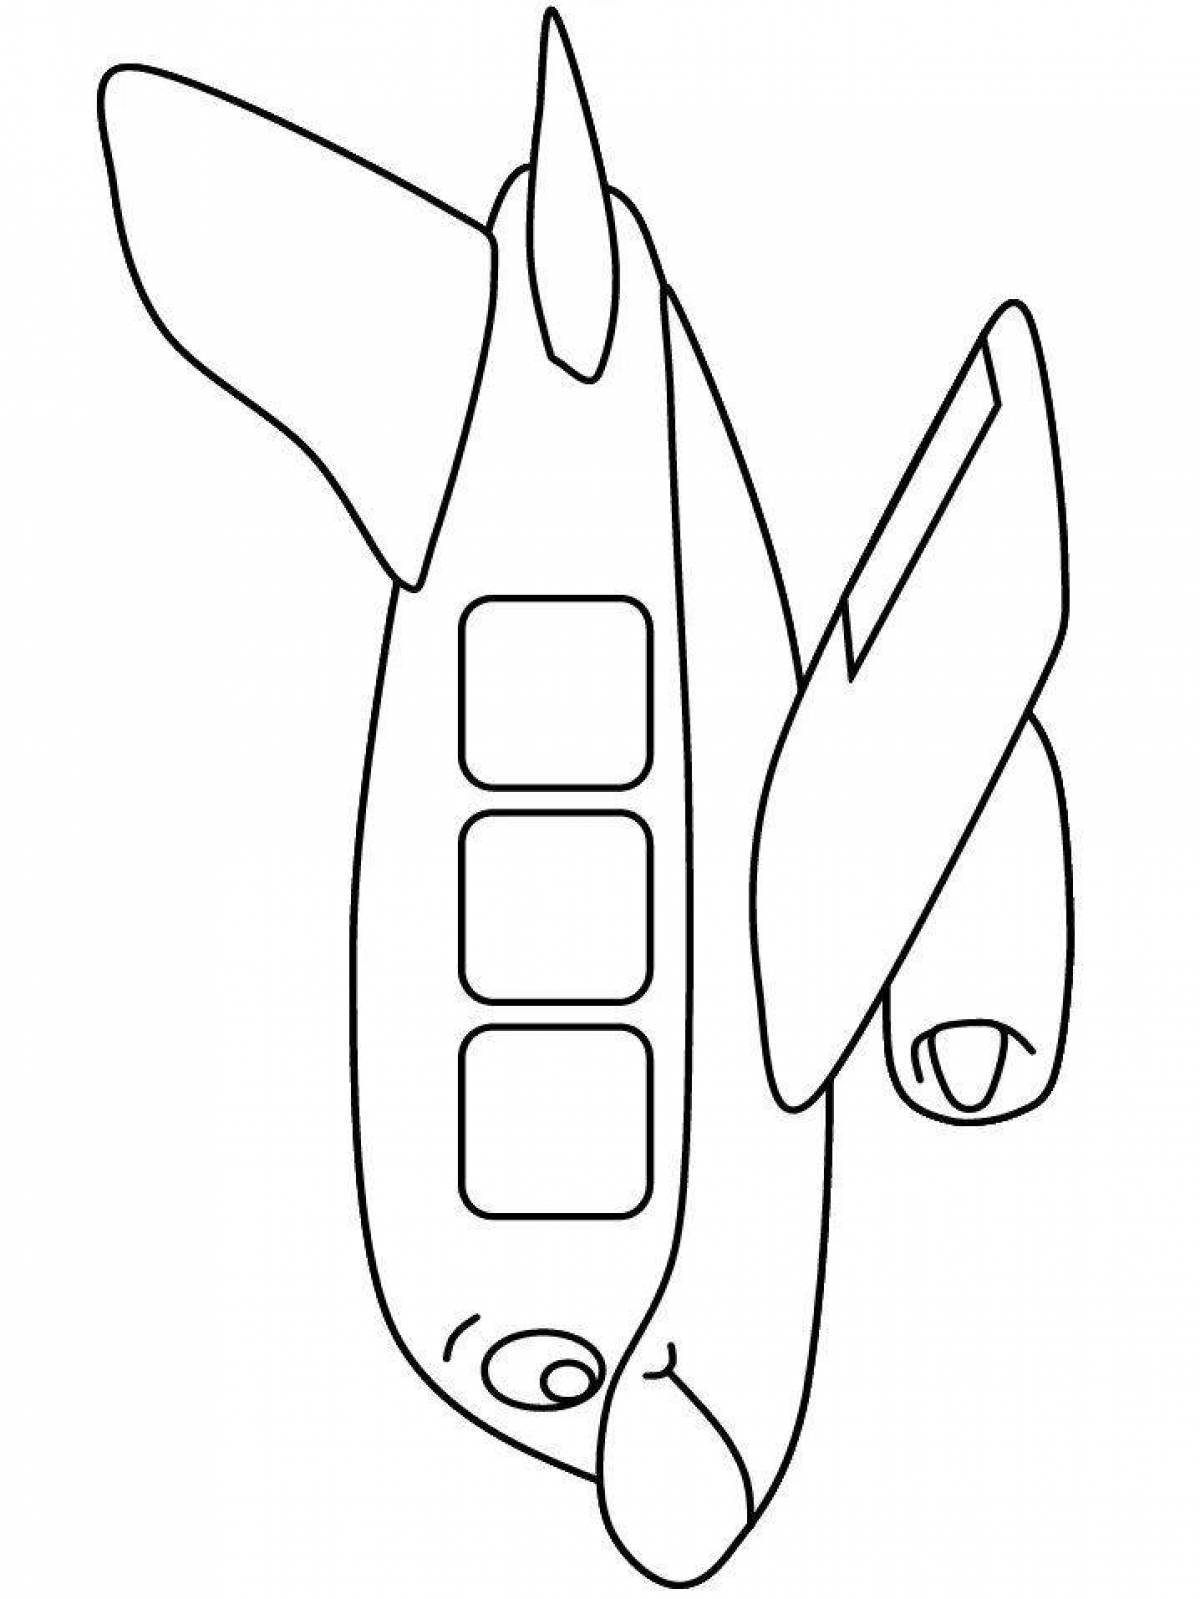 Adorable airplane coloring page